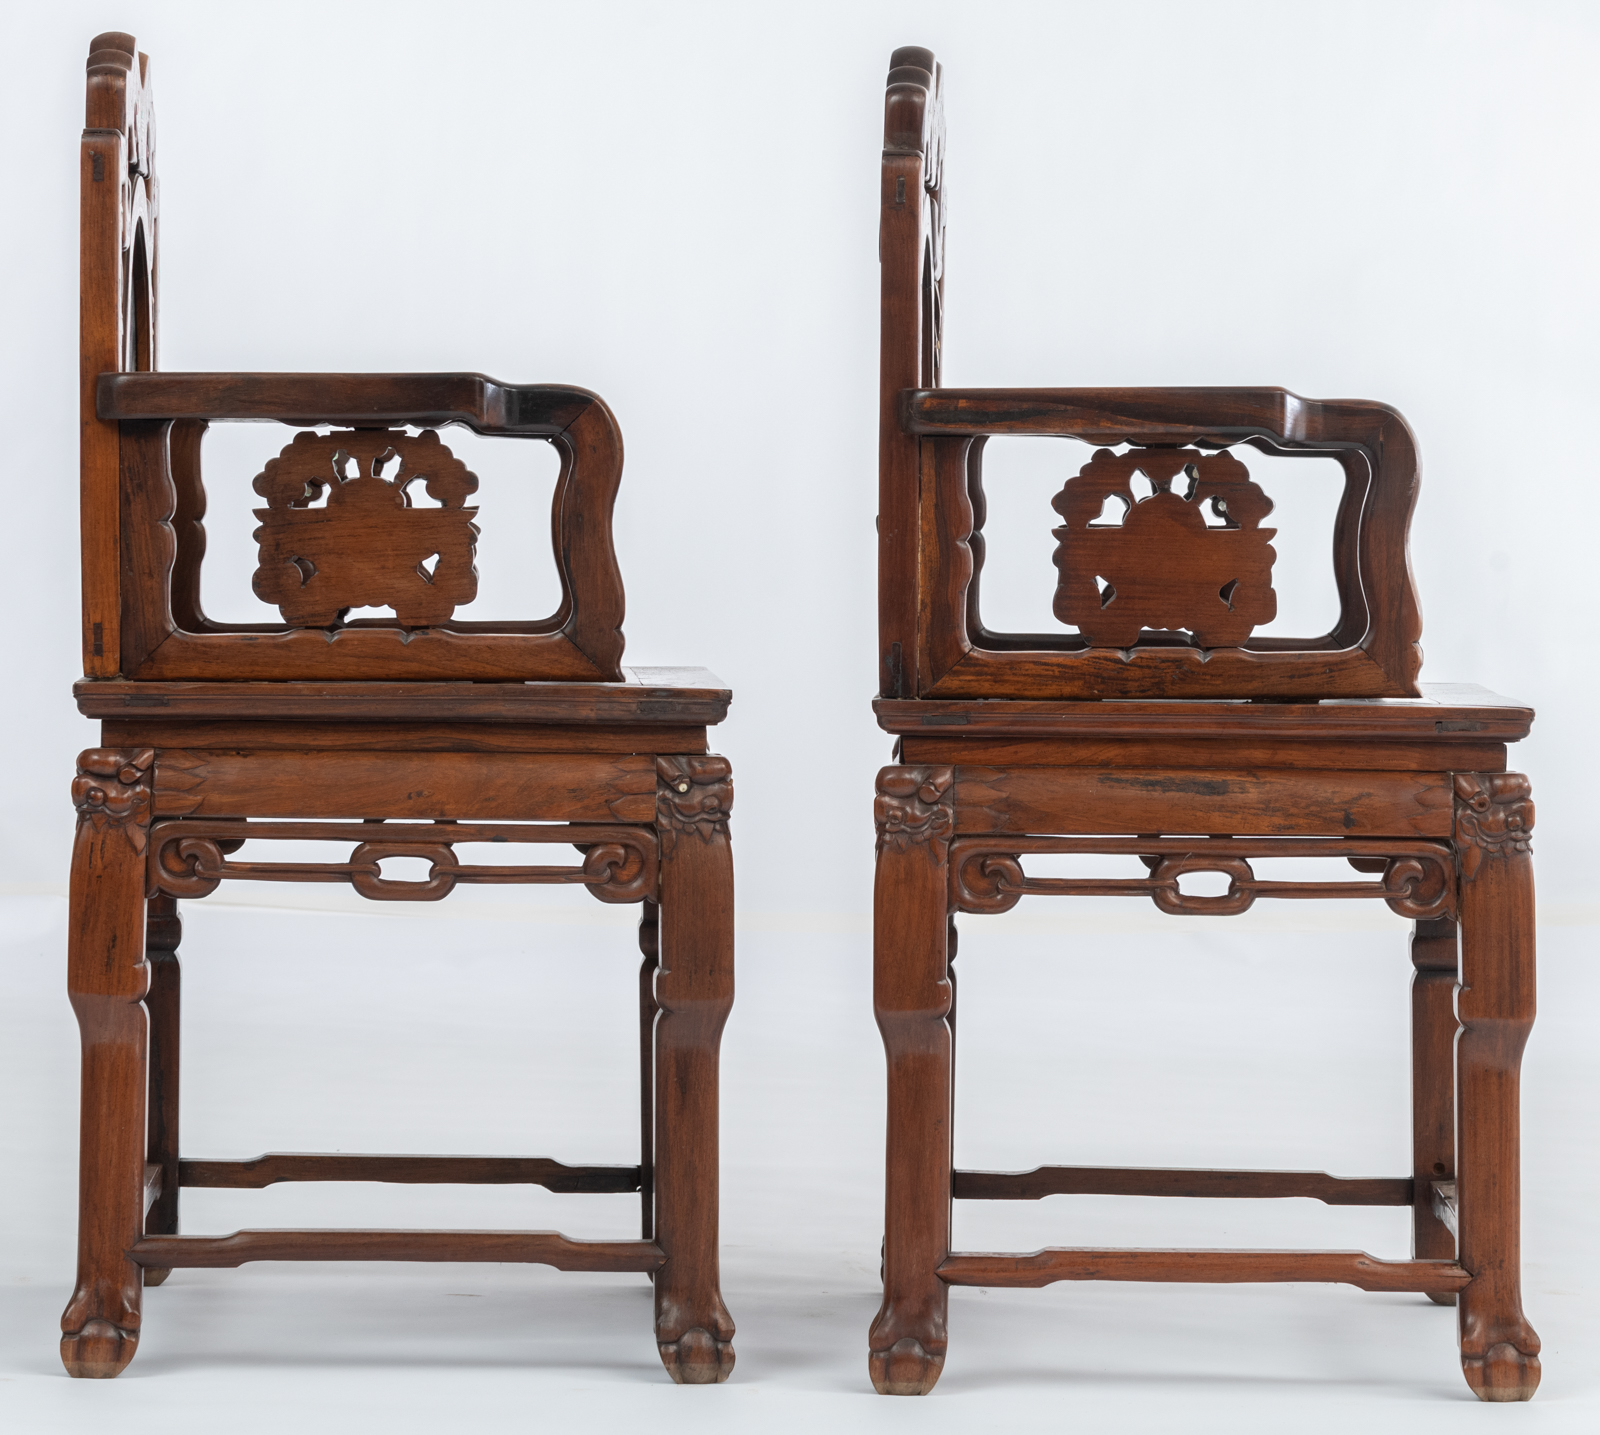 A Chinese rosewood furniture set, with inlaid marble plaques and mother-of pearldecoration, consisti - Image 5 of 16